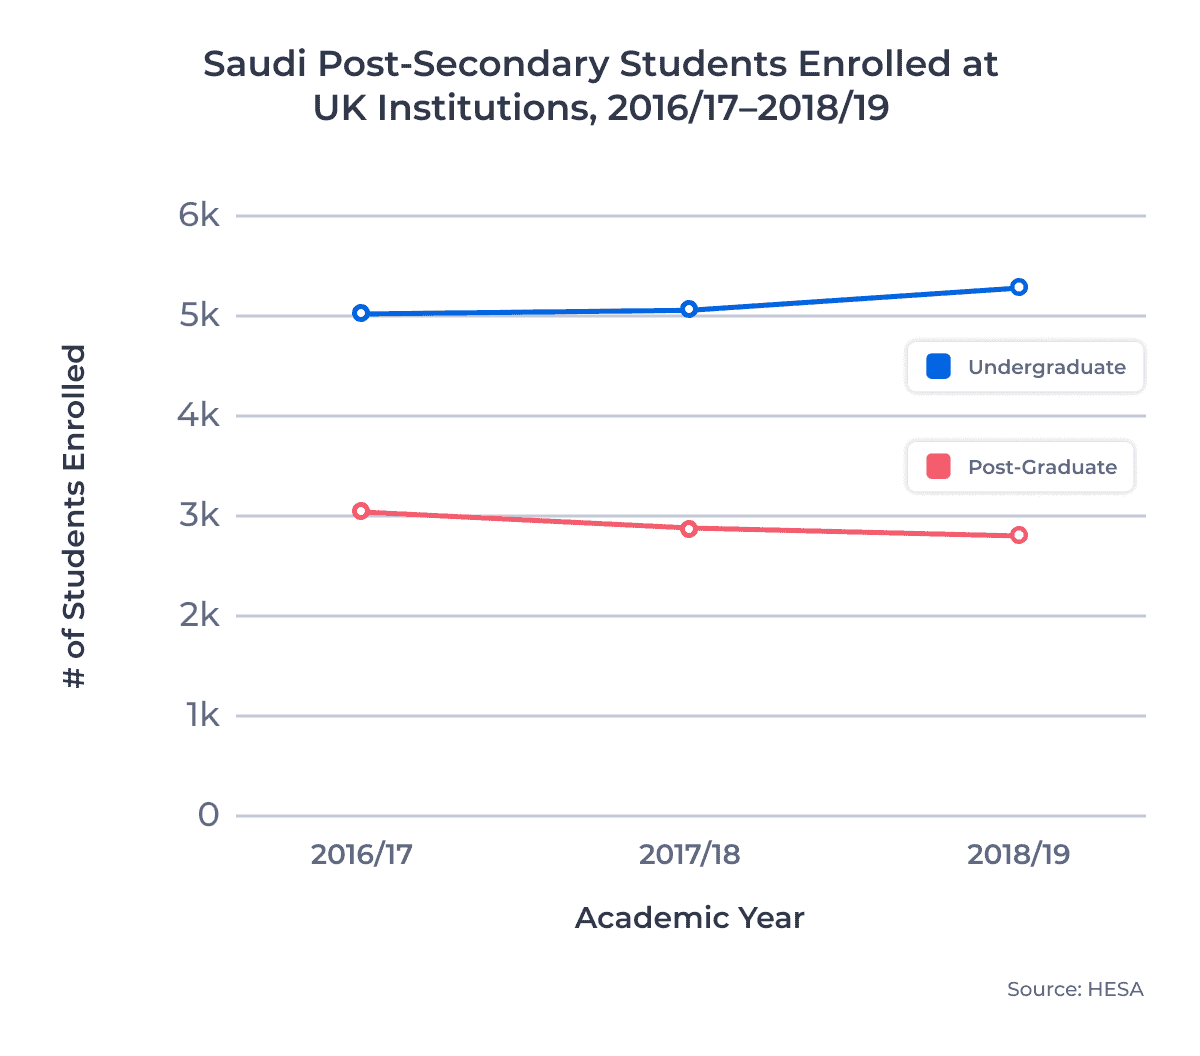 Saudi Post-Secondary Students Enrolled at UK Institutions, 2016/17â2018/19